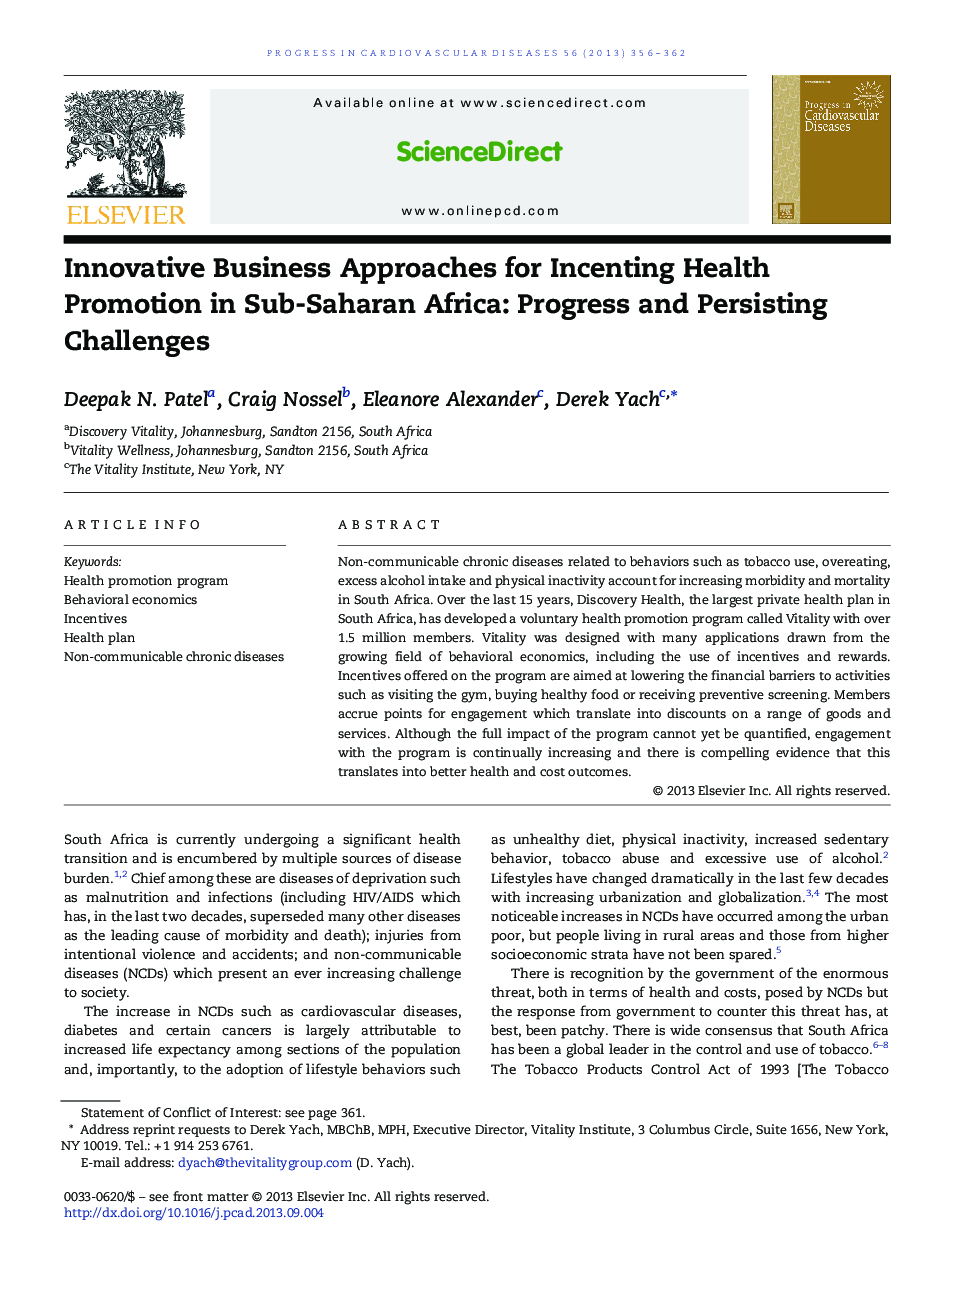 Innovative Business Approaches for Incenting Health Promotion in Sub-Saharan Africa: Progress and Persisting Challenges 